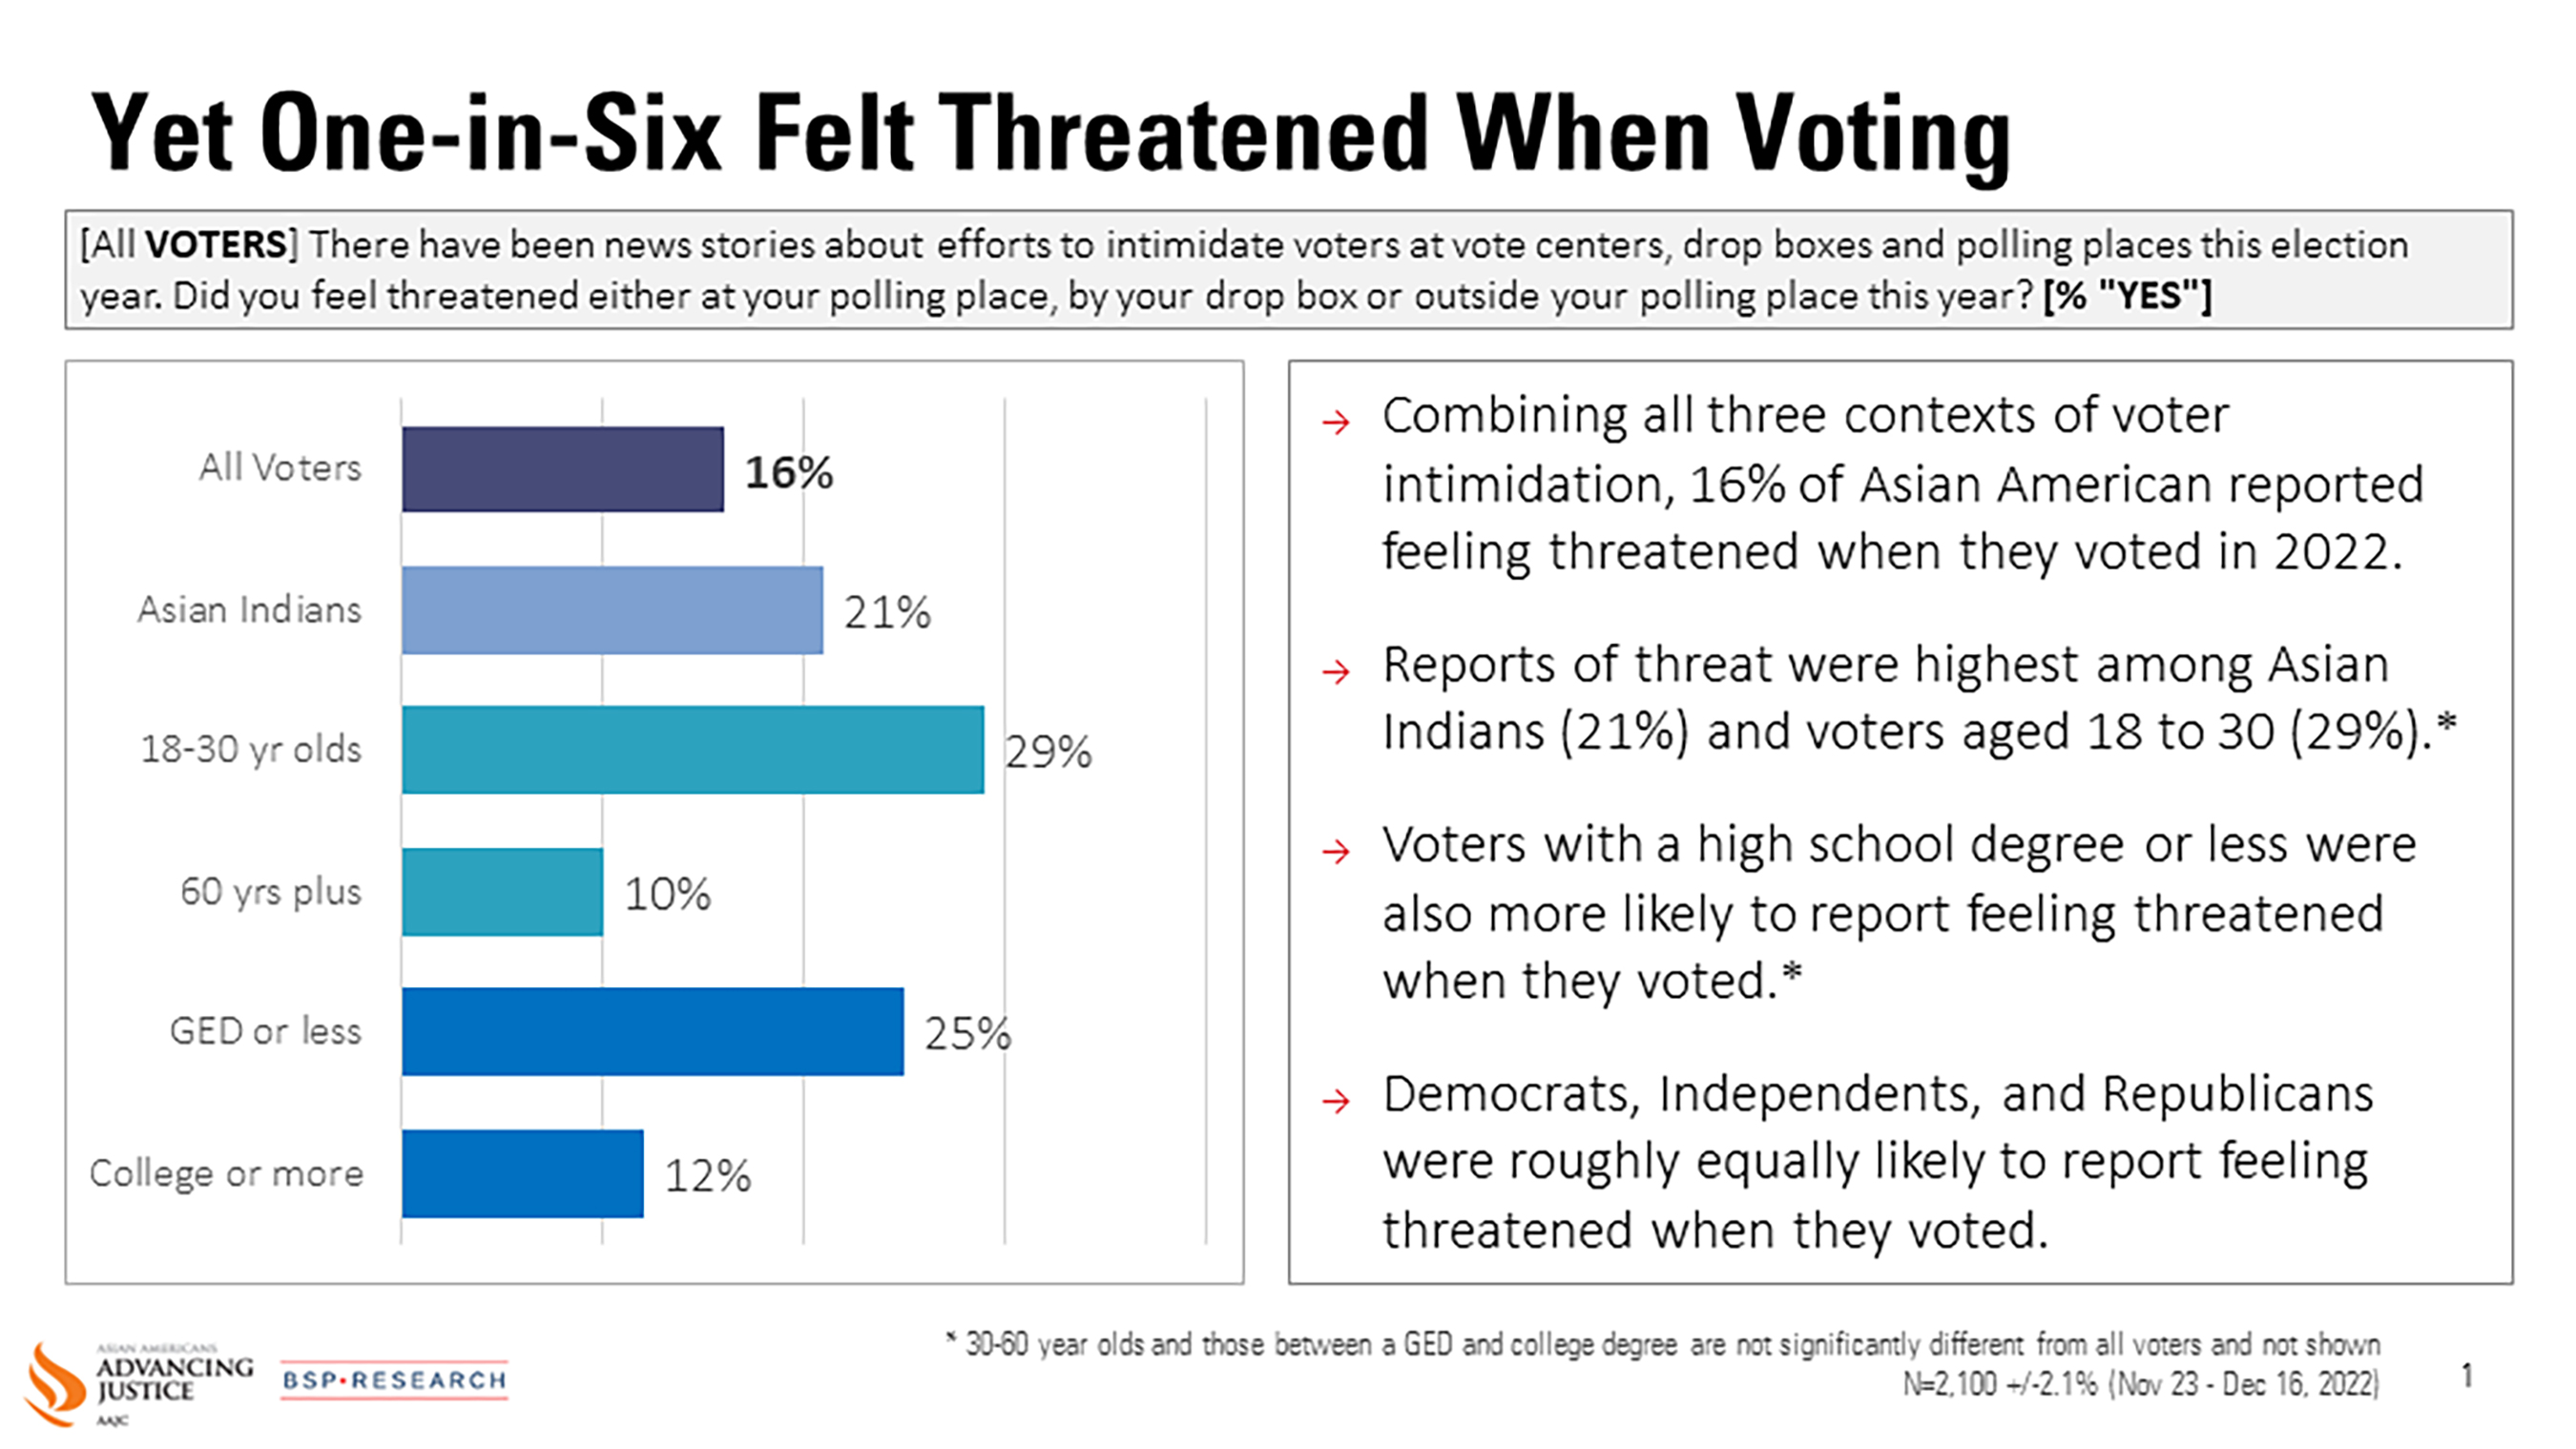 1 in 6 Asian Americans Felt Threatened While Voting in 2022 Midterm Elections According to New 2022 National Poll